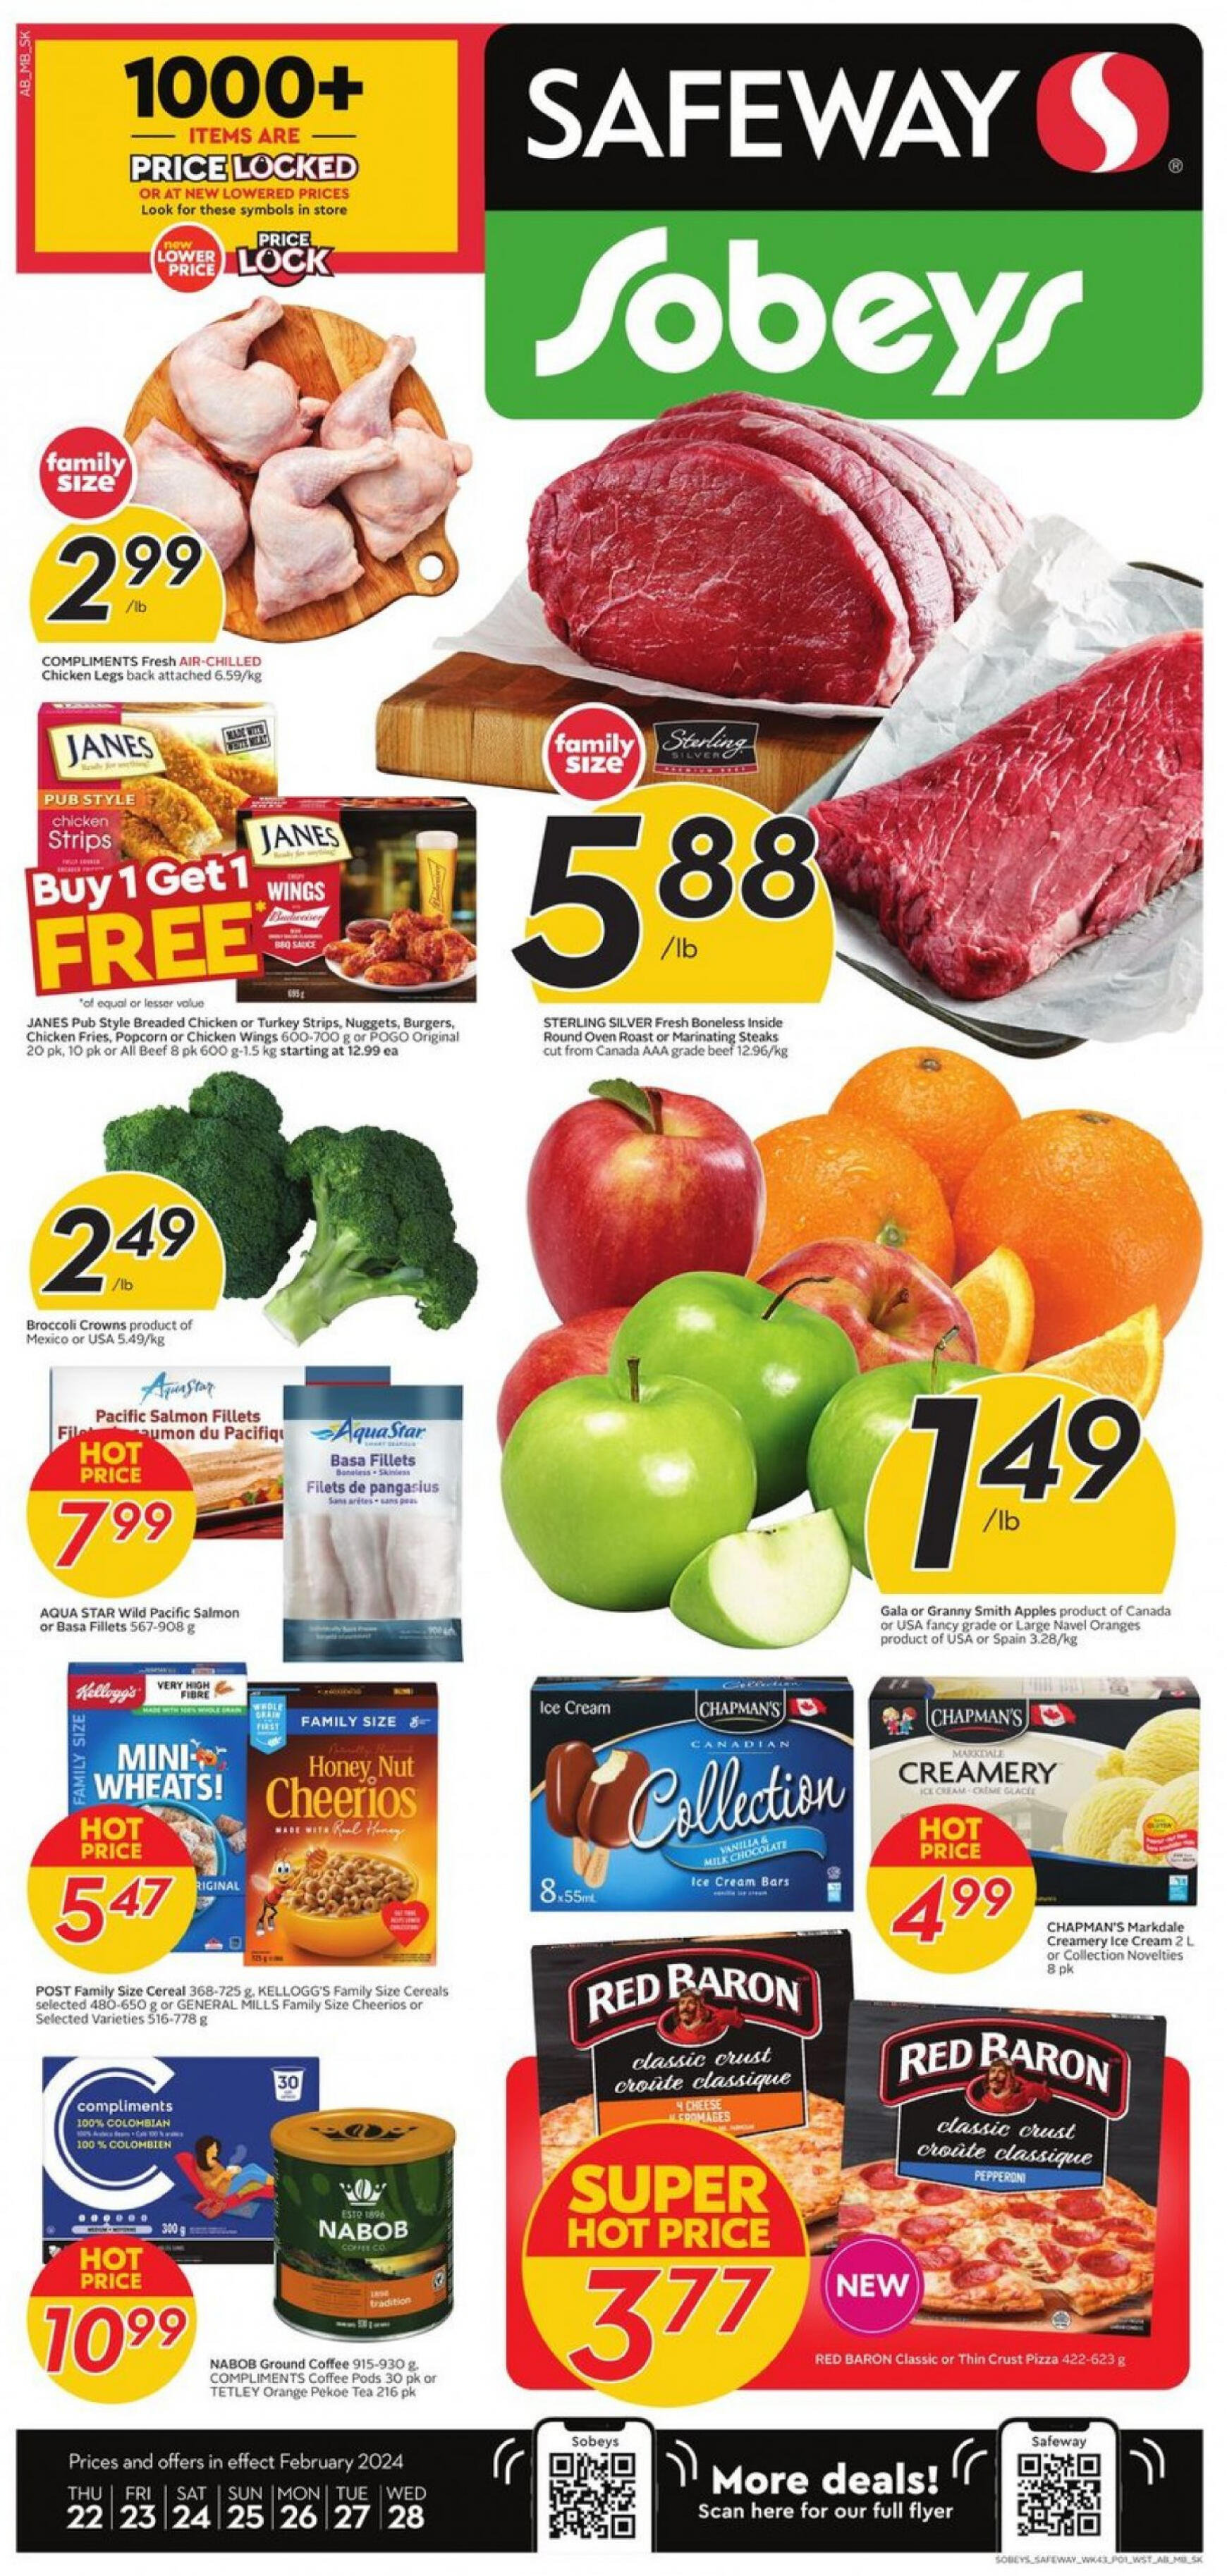 safeway - Safeway valid from 22.02.2024 - page: 1